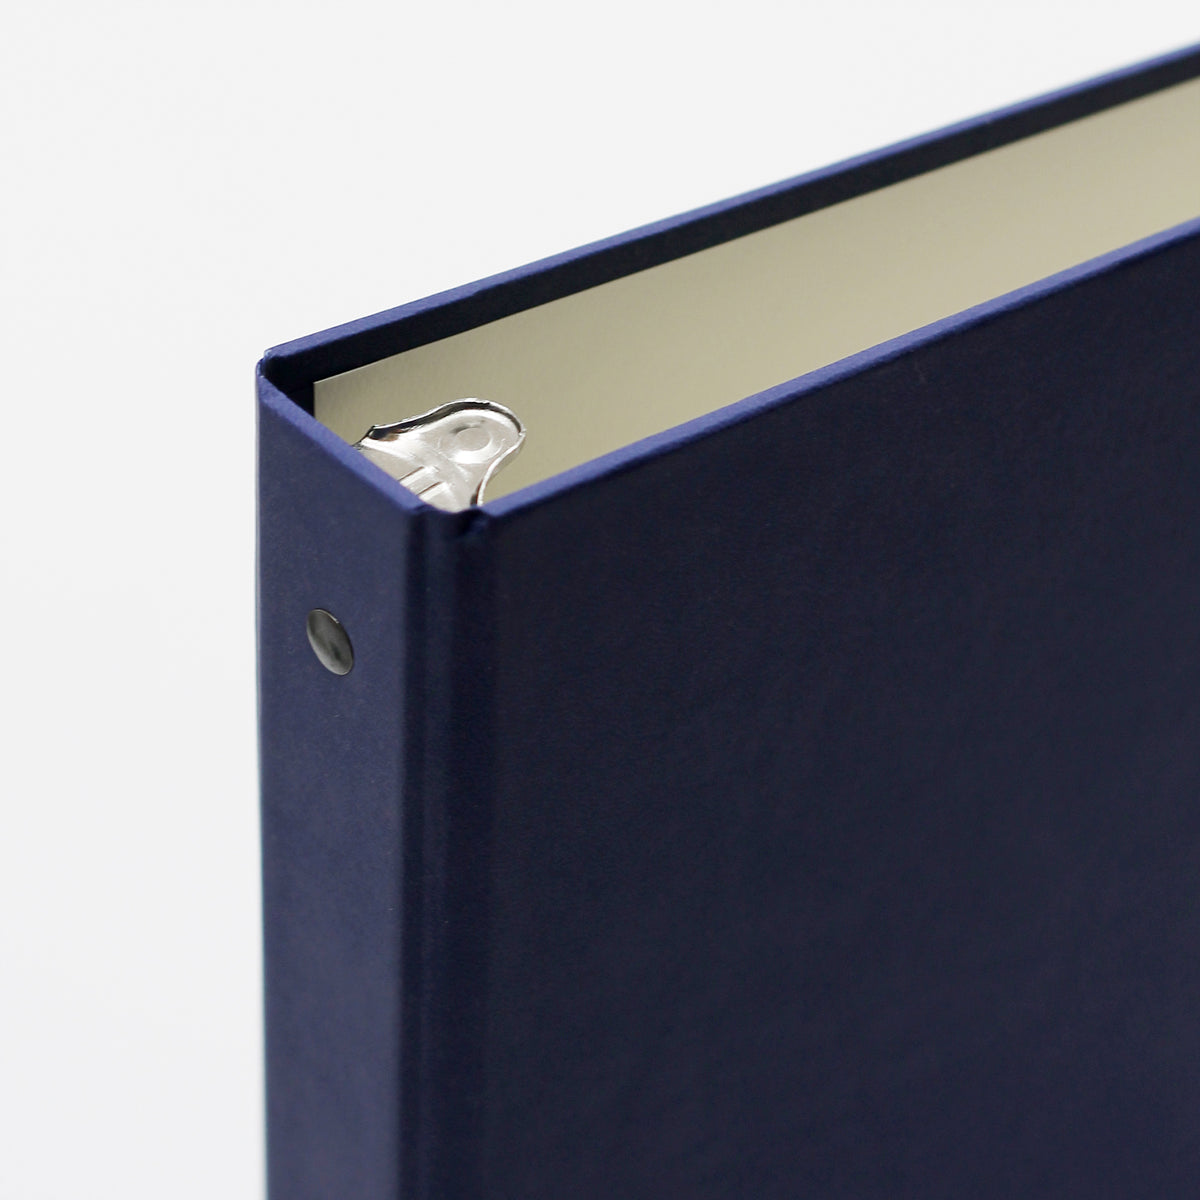 Officiant Binder | Cover: Indigo Vegan Leather | Available Personalized